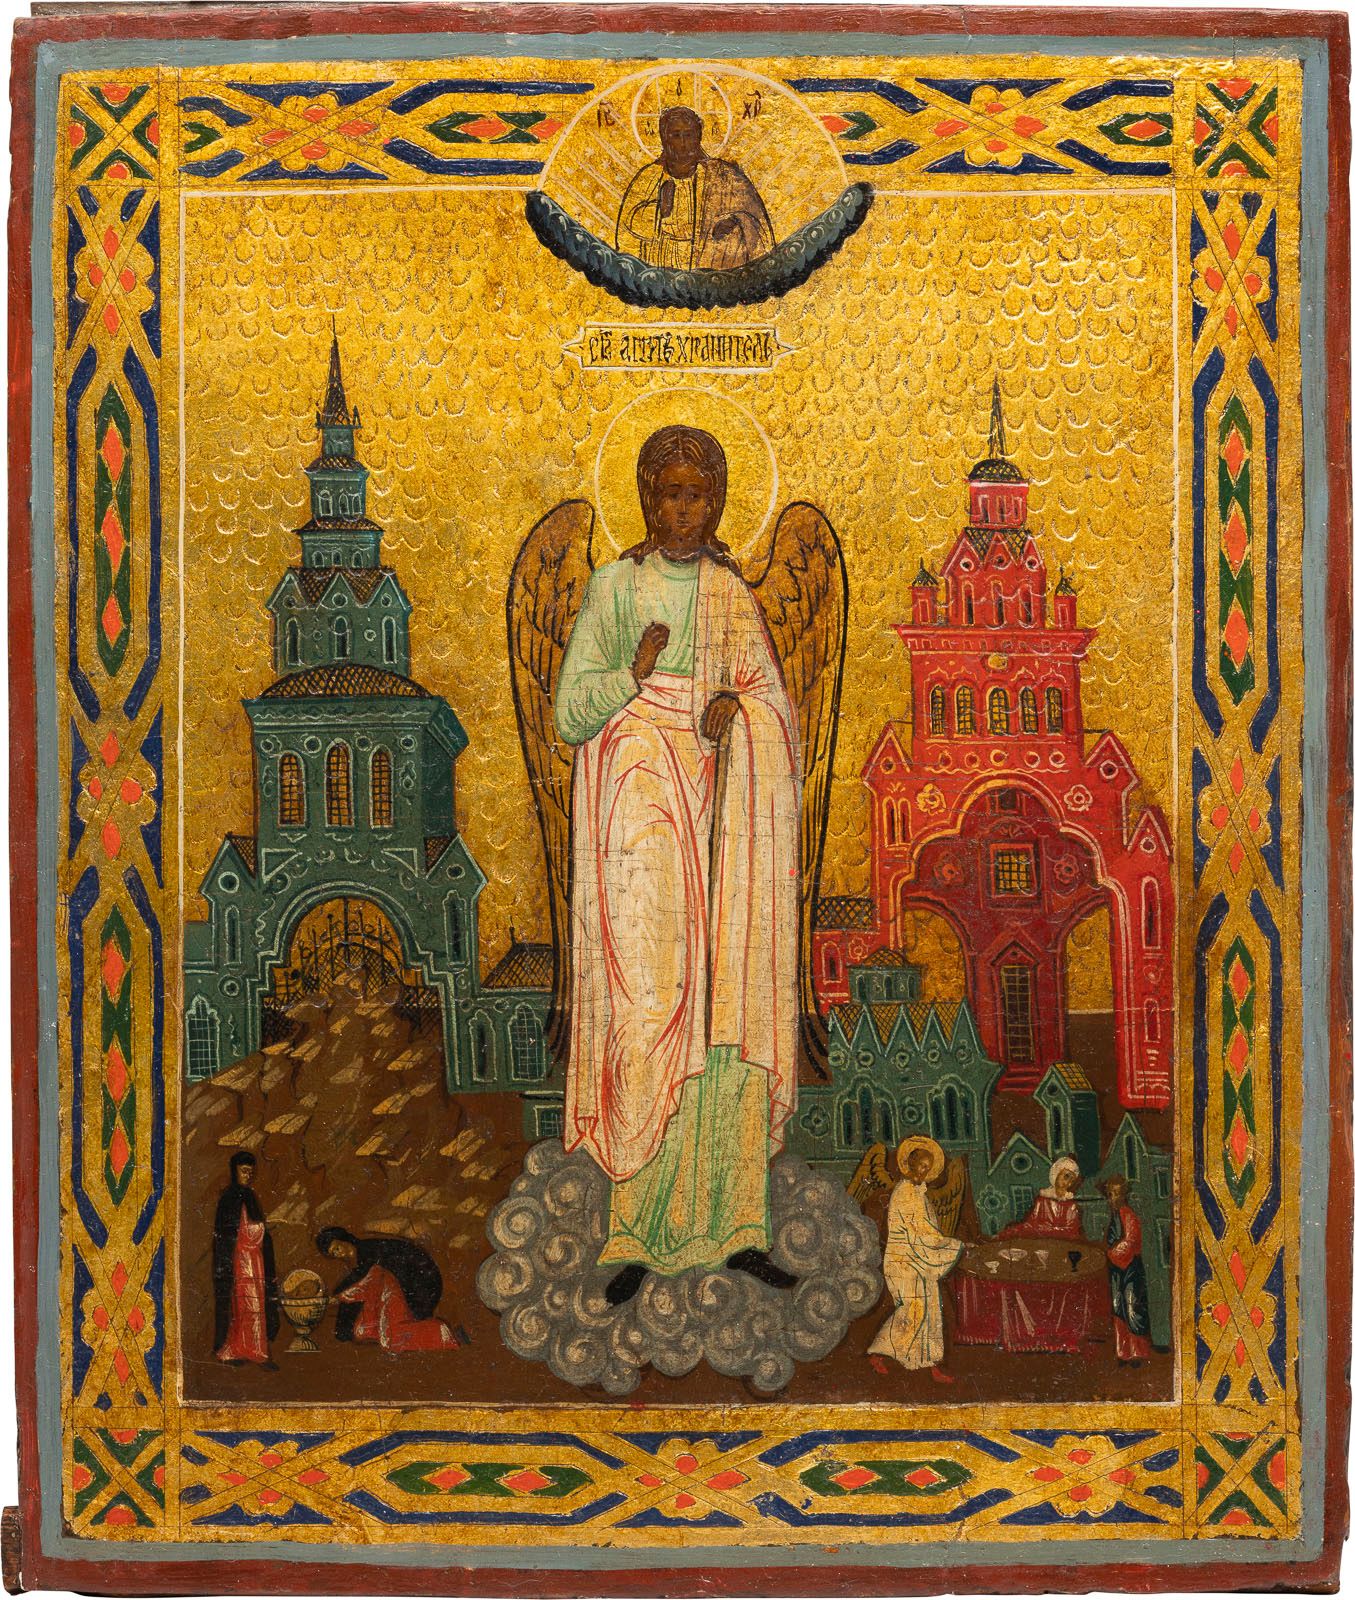 AN ICON SHOWING THE GUARDIAN ANGEL (ST. JOHN THE FORERUNNER ICONA CHE MOSTRA L'A&hellip;